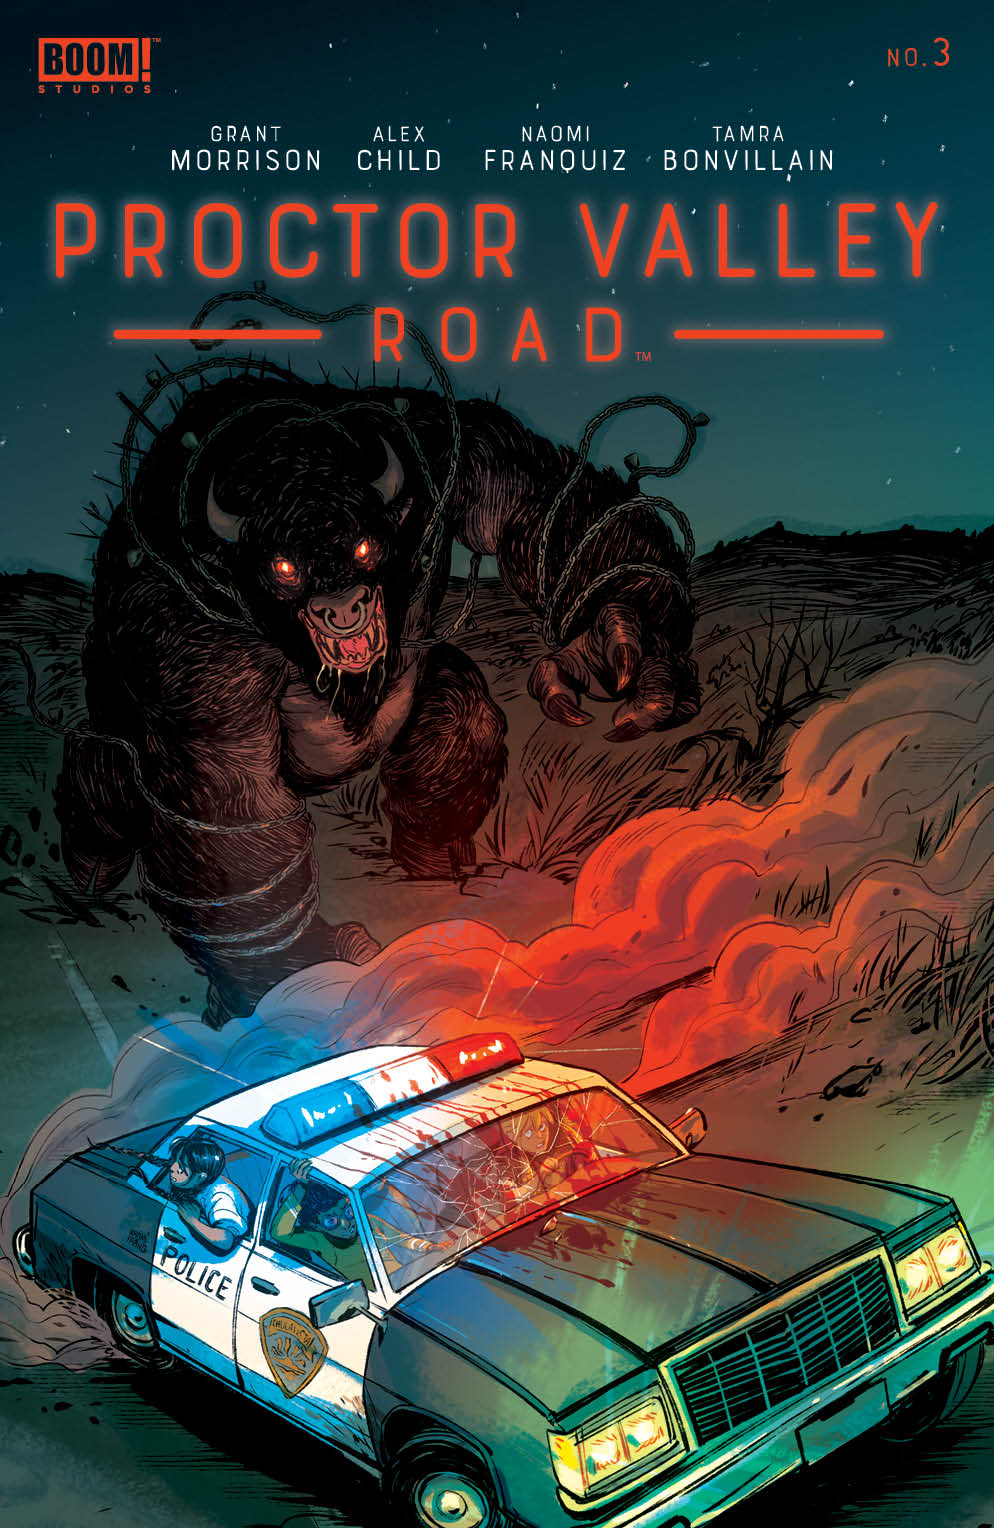 Proctor Valley Road #3 Cover A Franquiz (Mature) (Of 5)